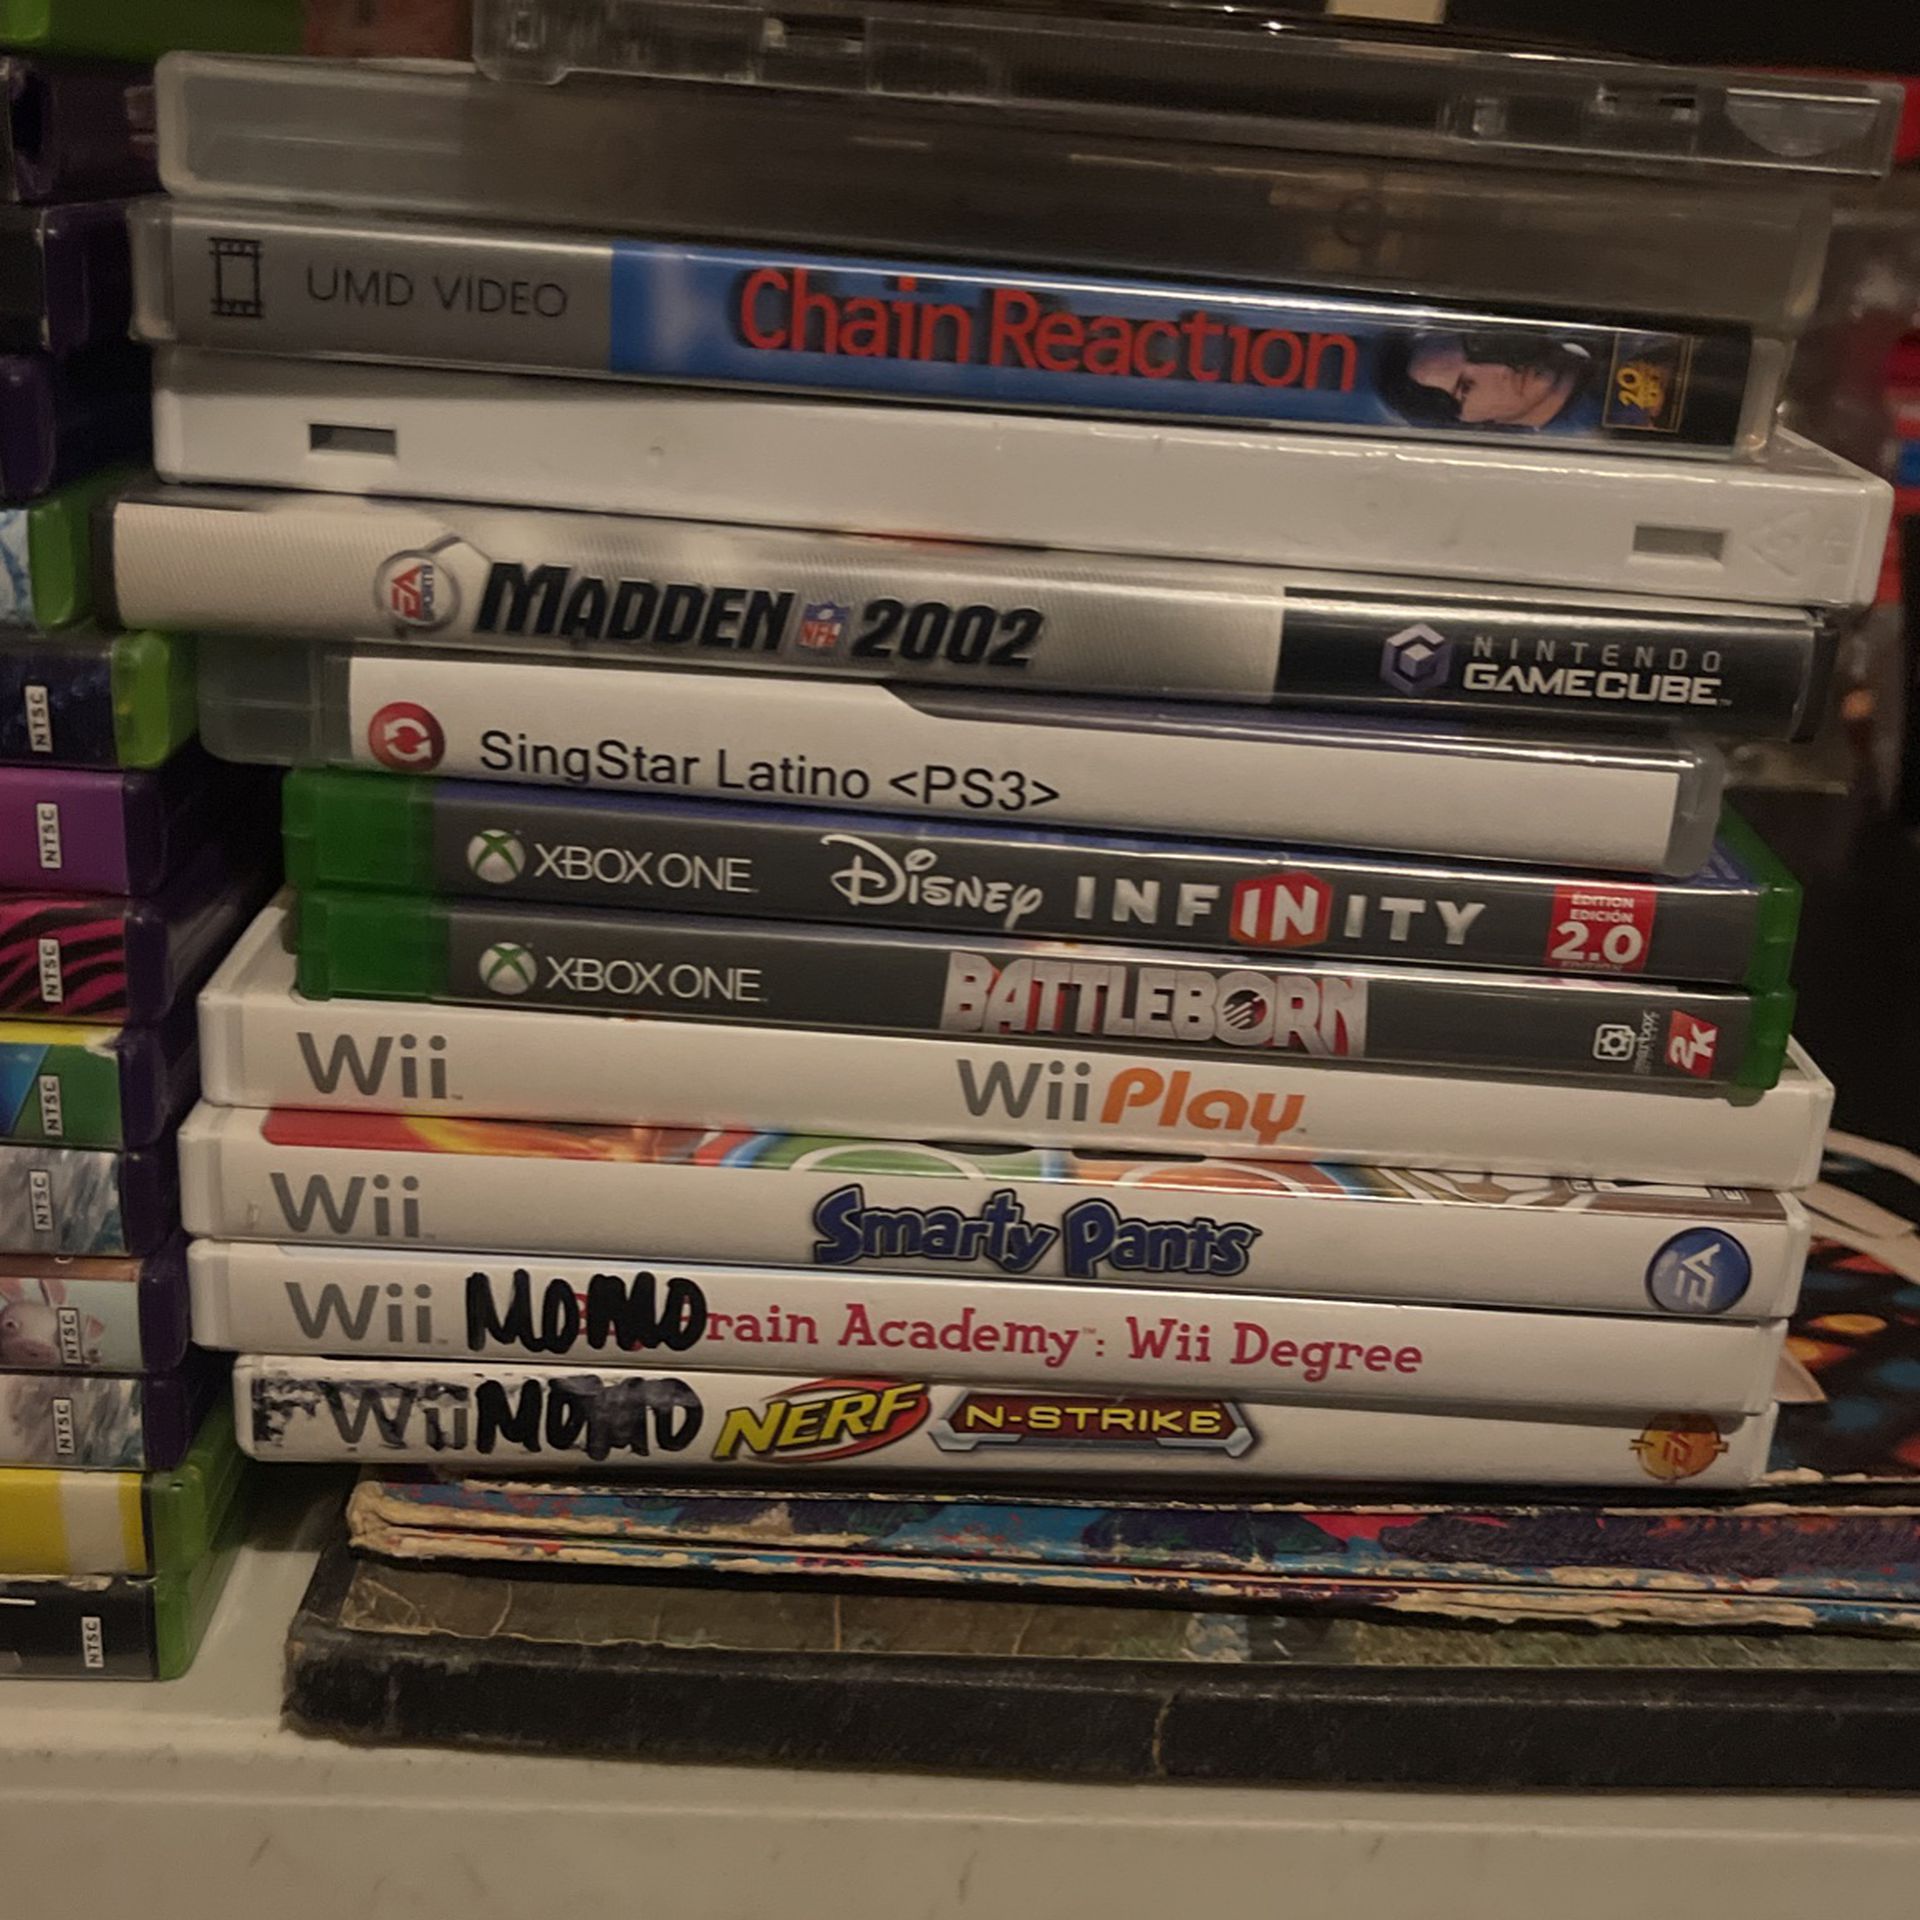 35 Games PS2-7 Games Xbox 360-16 Games And Others 